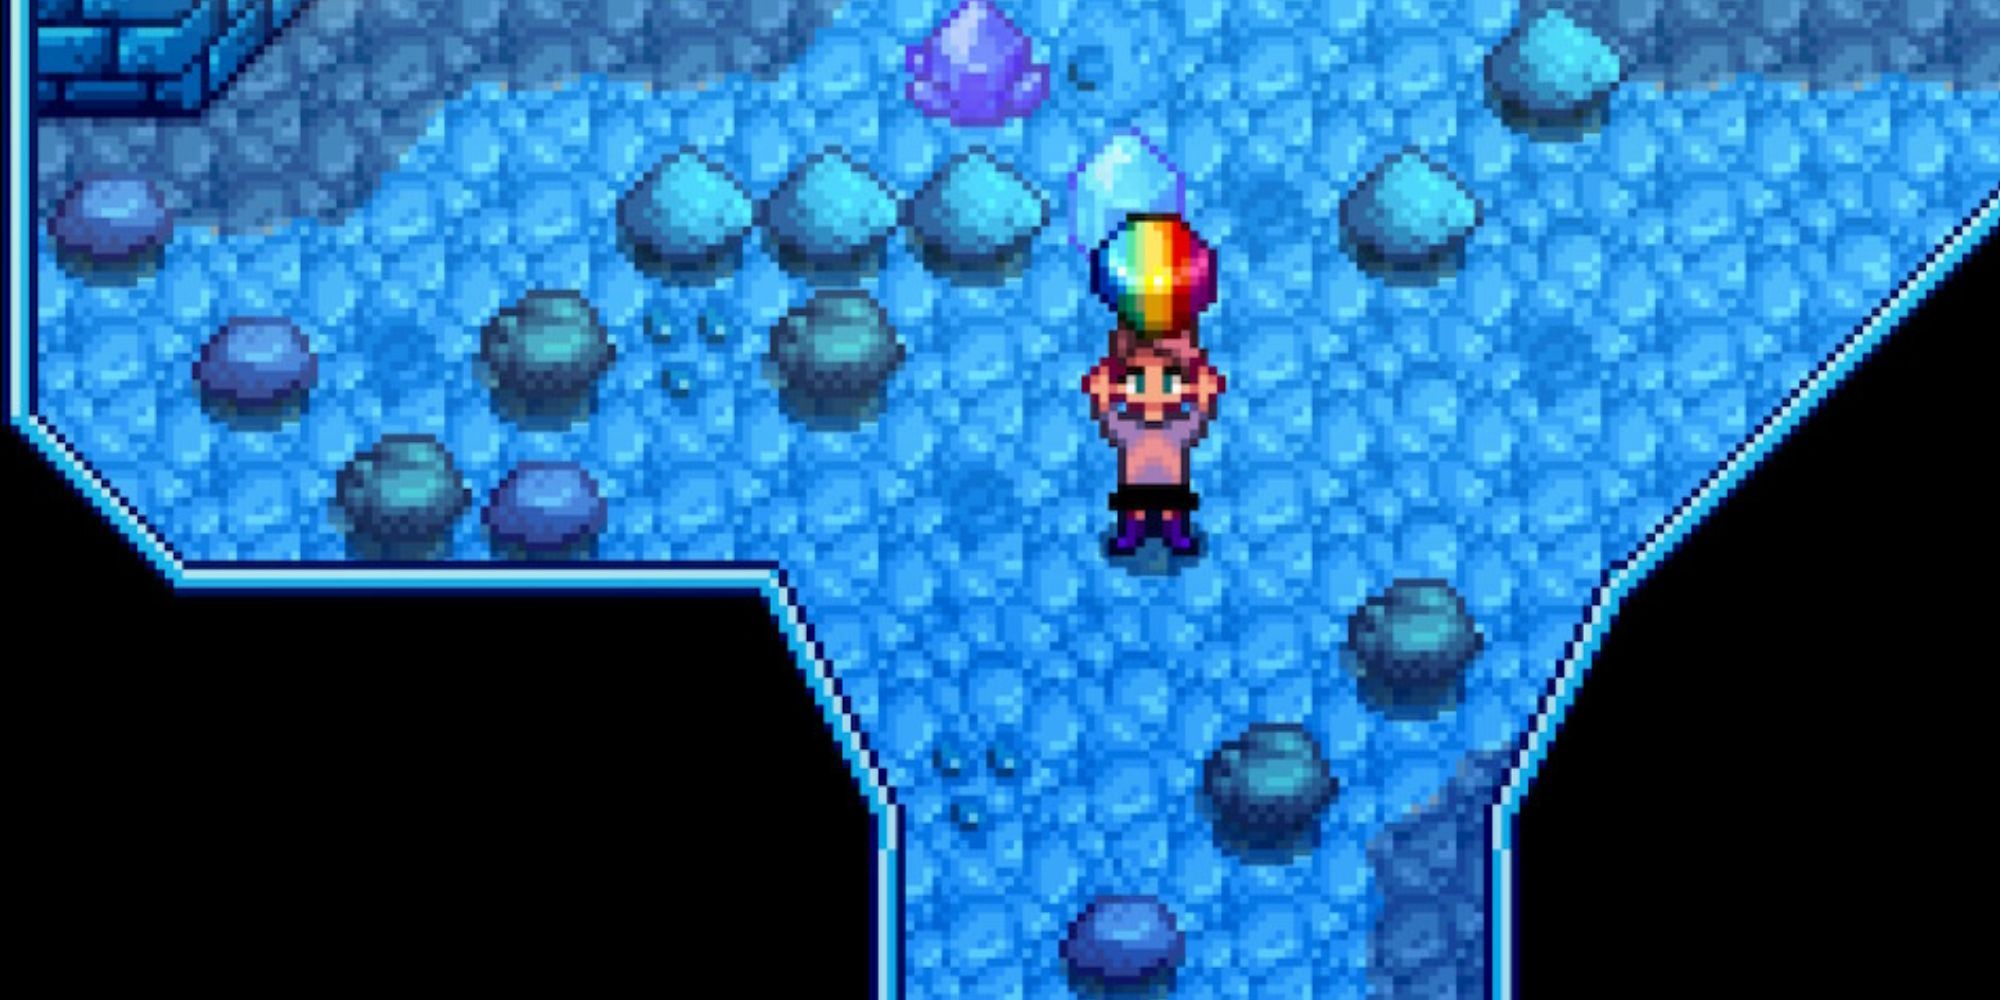 A Stardew Valley character holding a prismatic shard in the mines